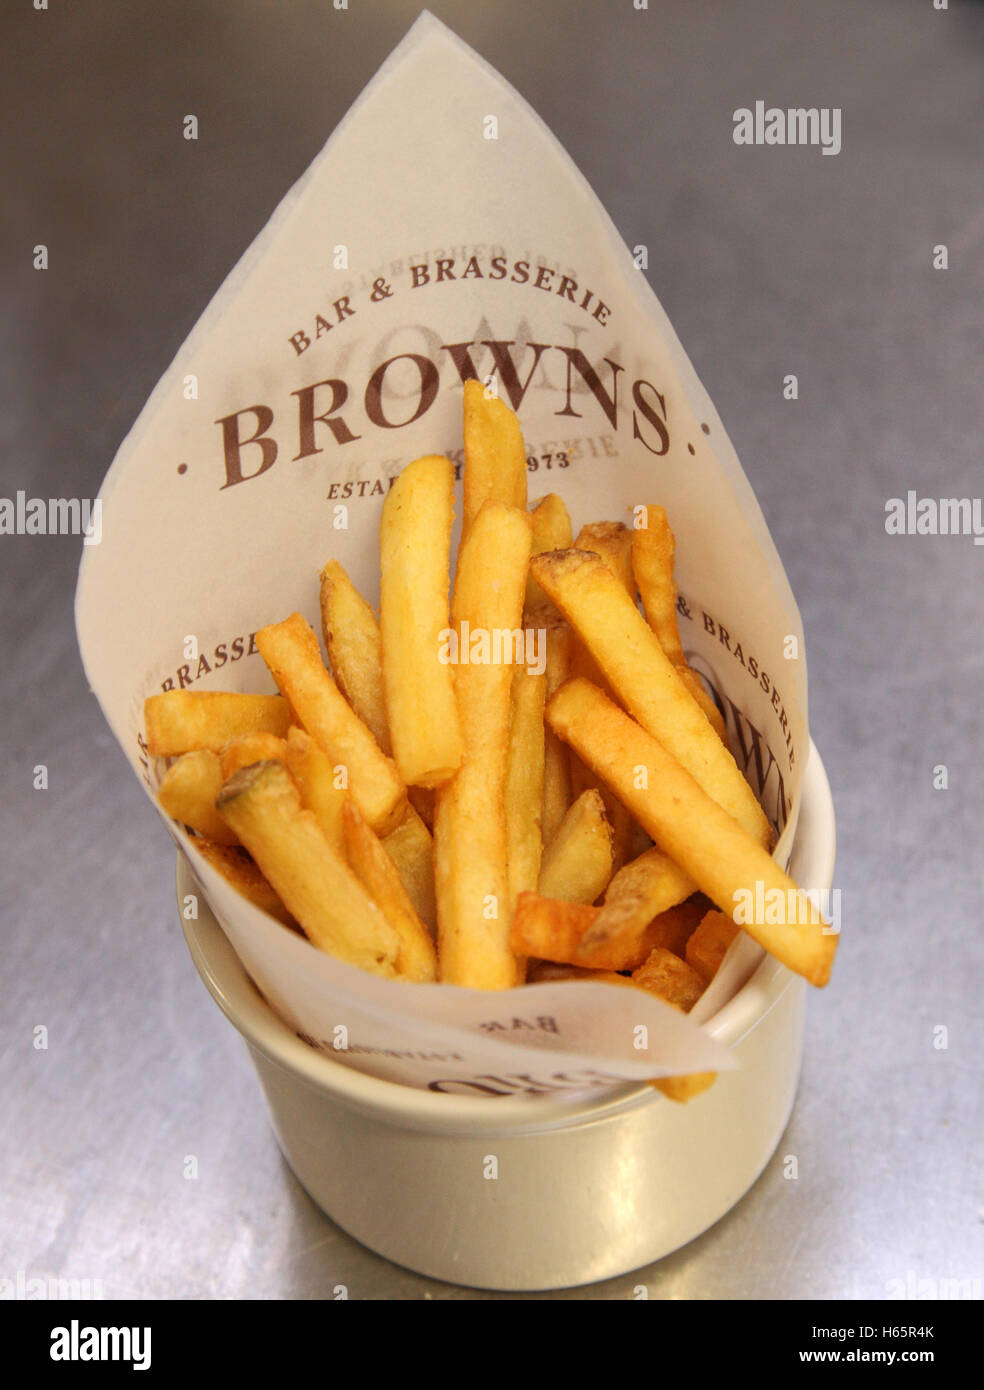 A portion of fries in a Brown's pub restaurant, in a porcelain container with serviette Stock Photo